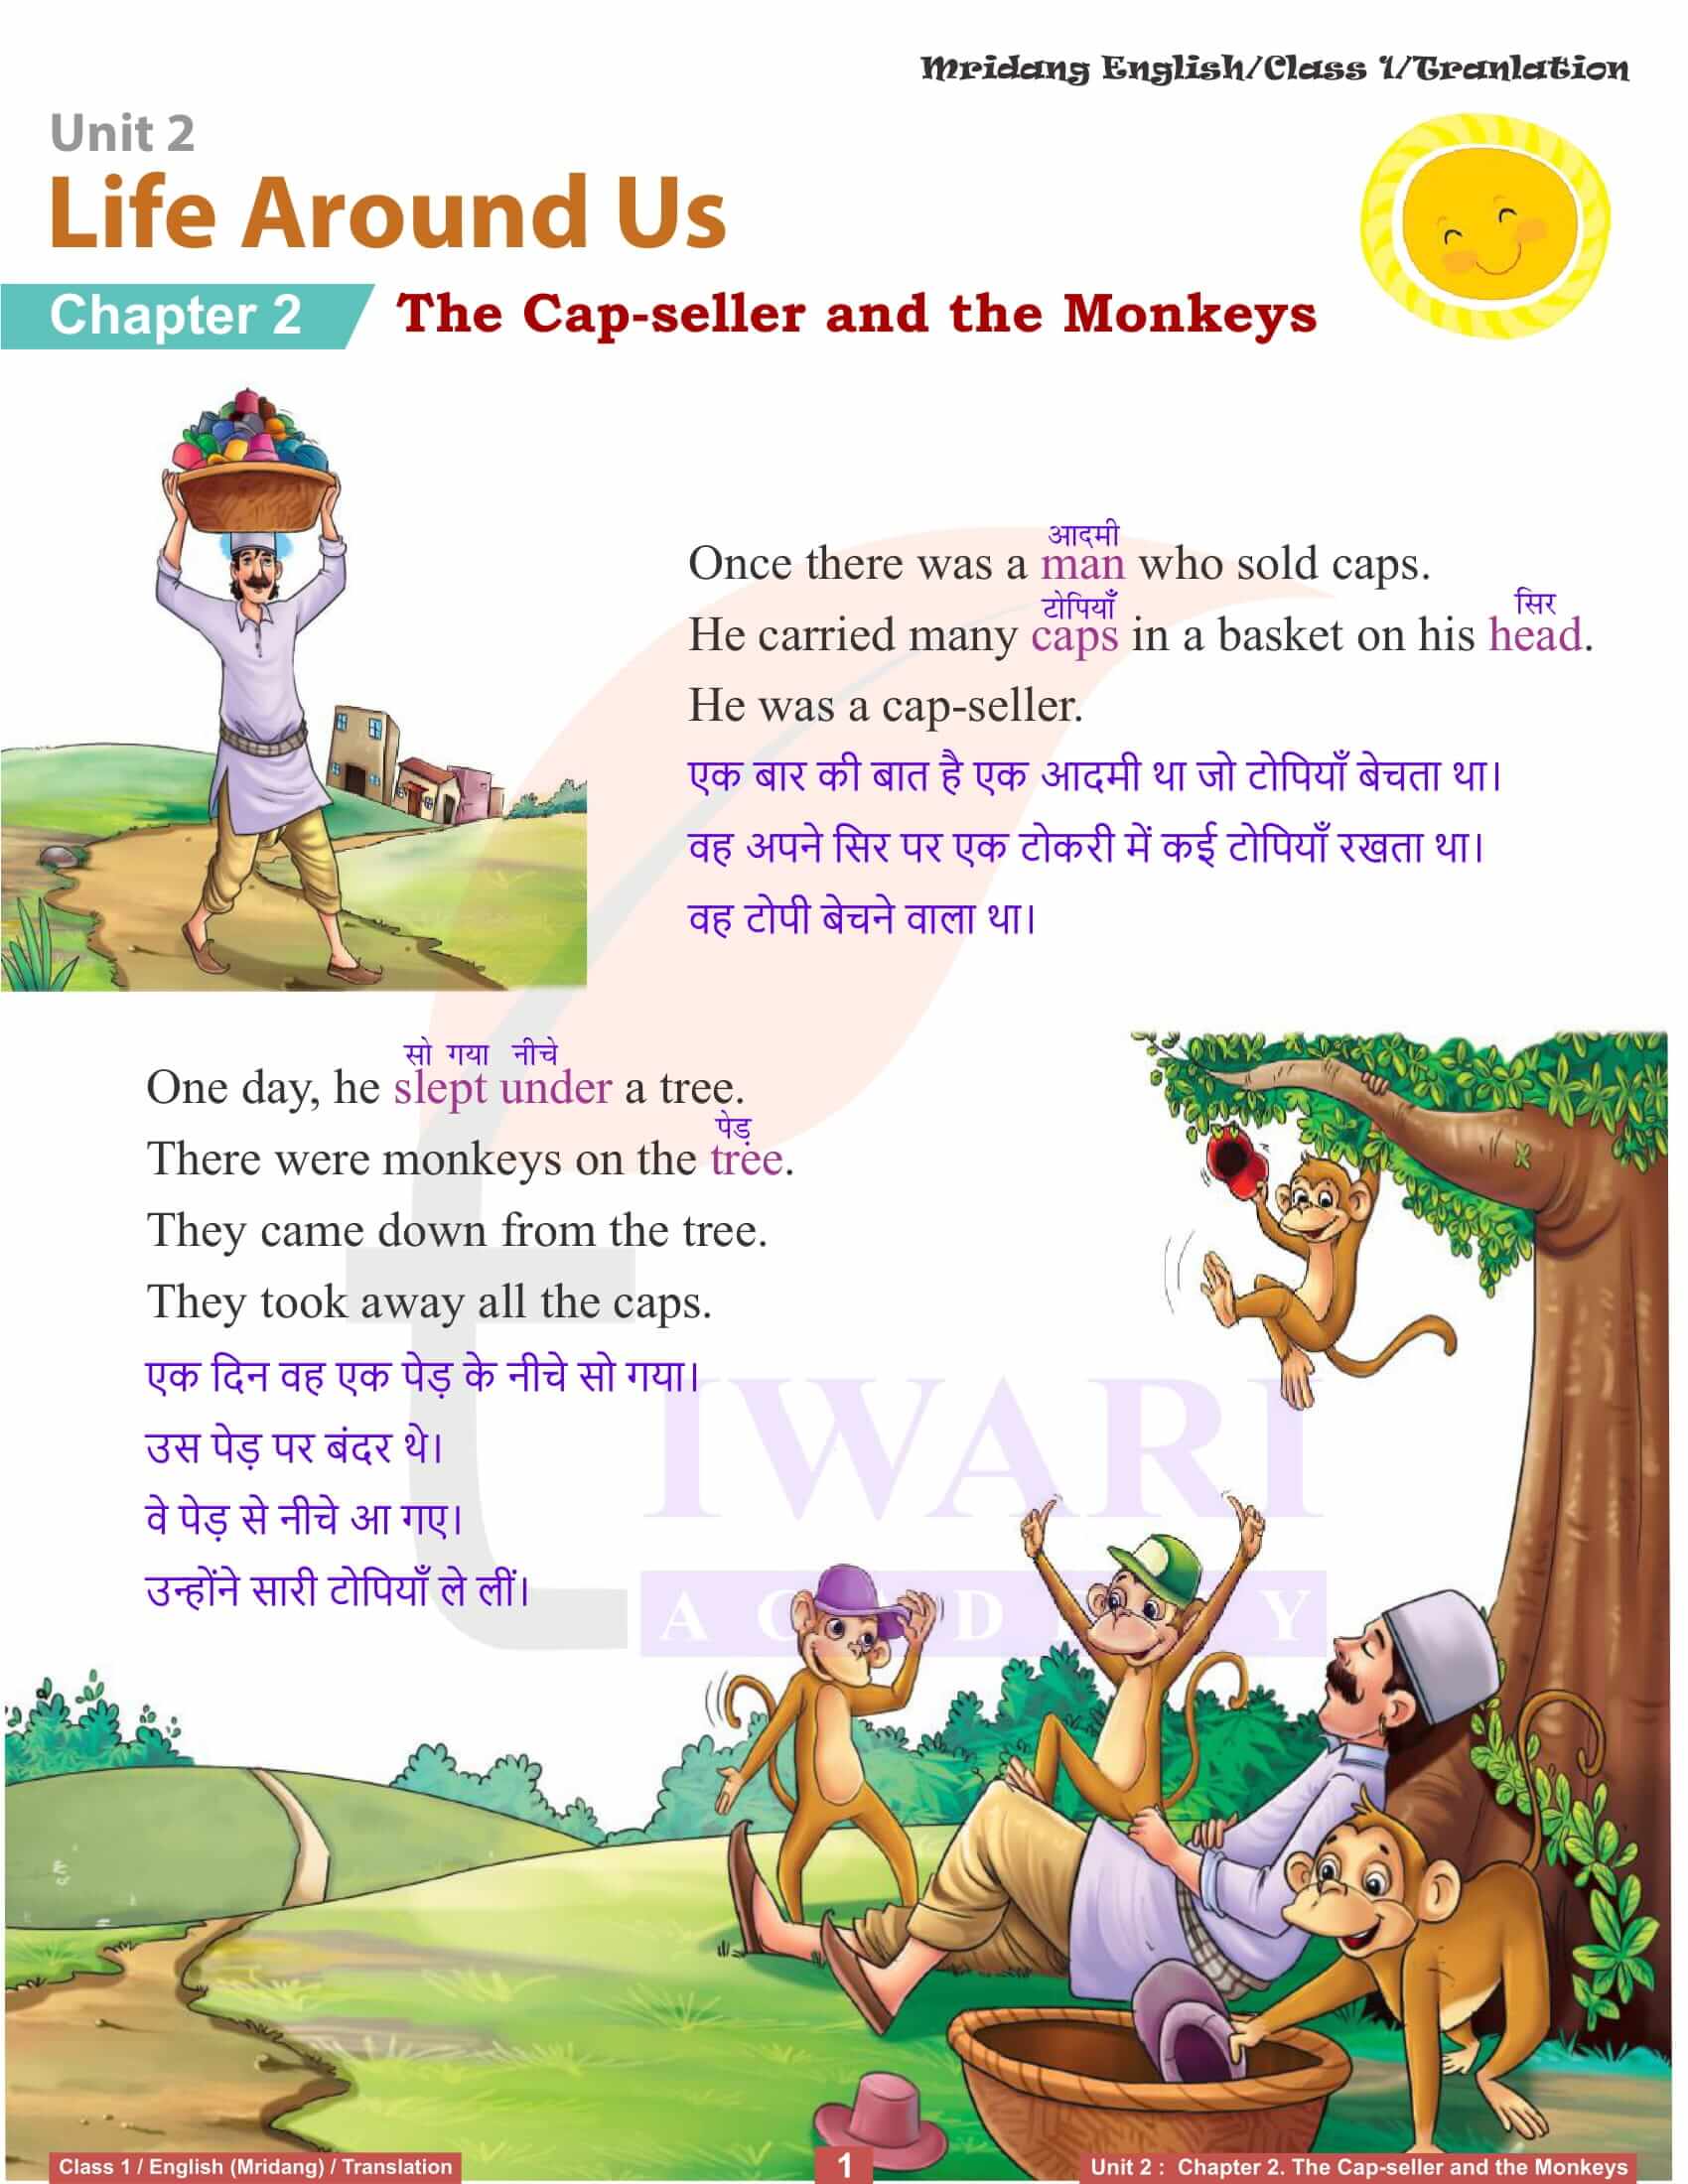 NCERT Solutions for Class 1 English Mridang Chapter 2 The Cap-seller and the Monkeys of Unit 2 Life Around Us